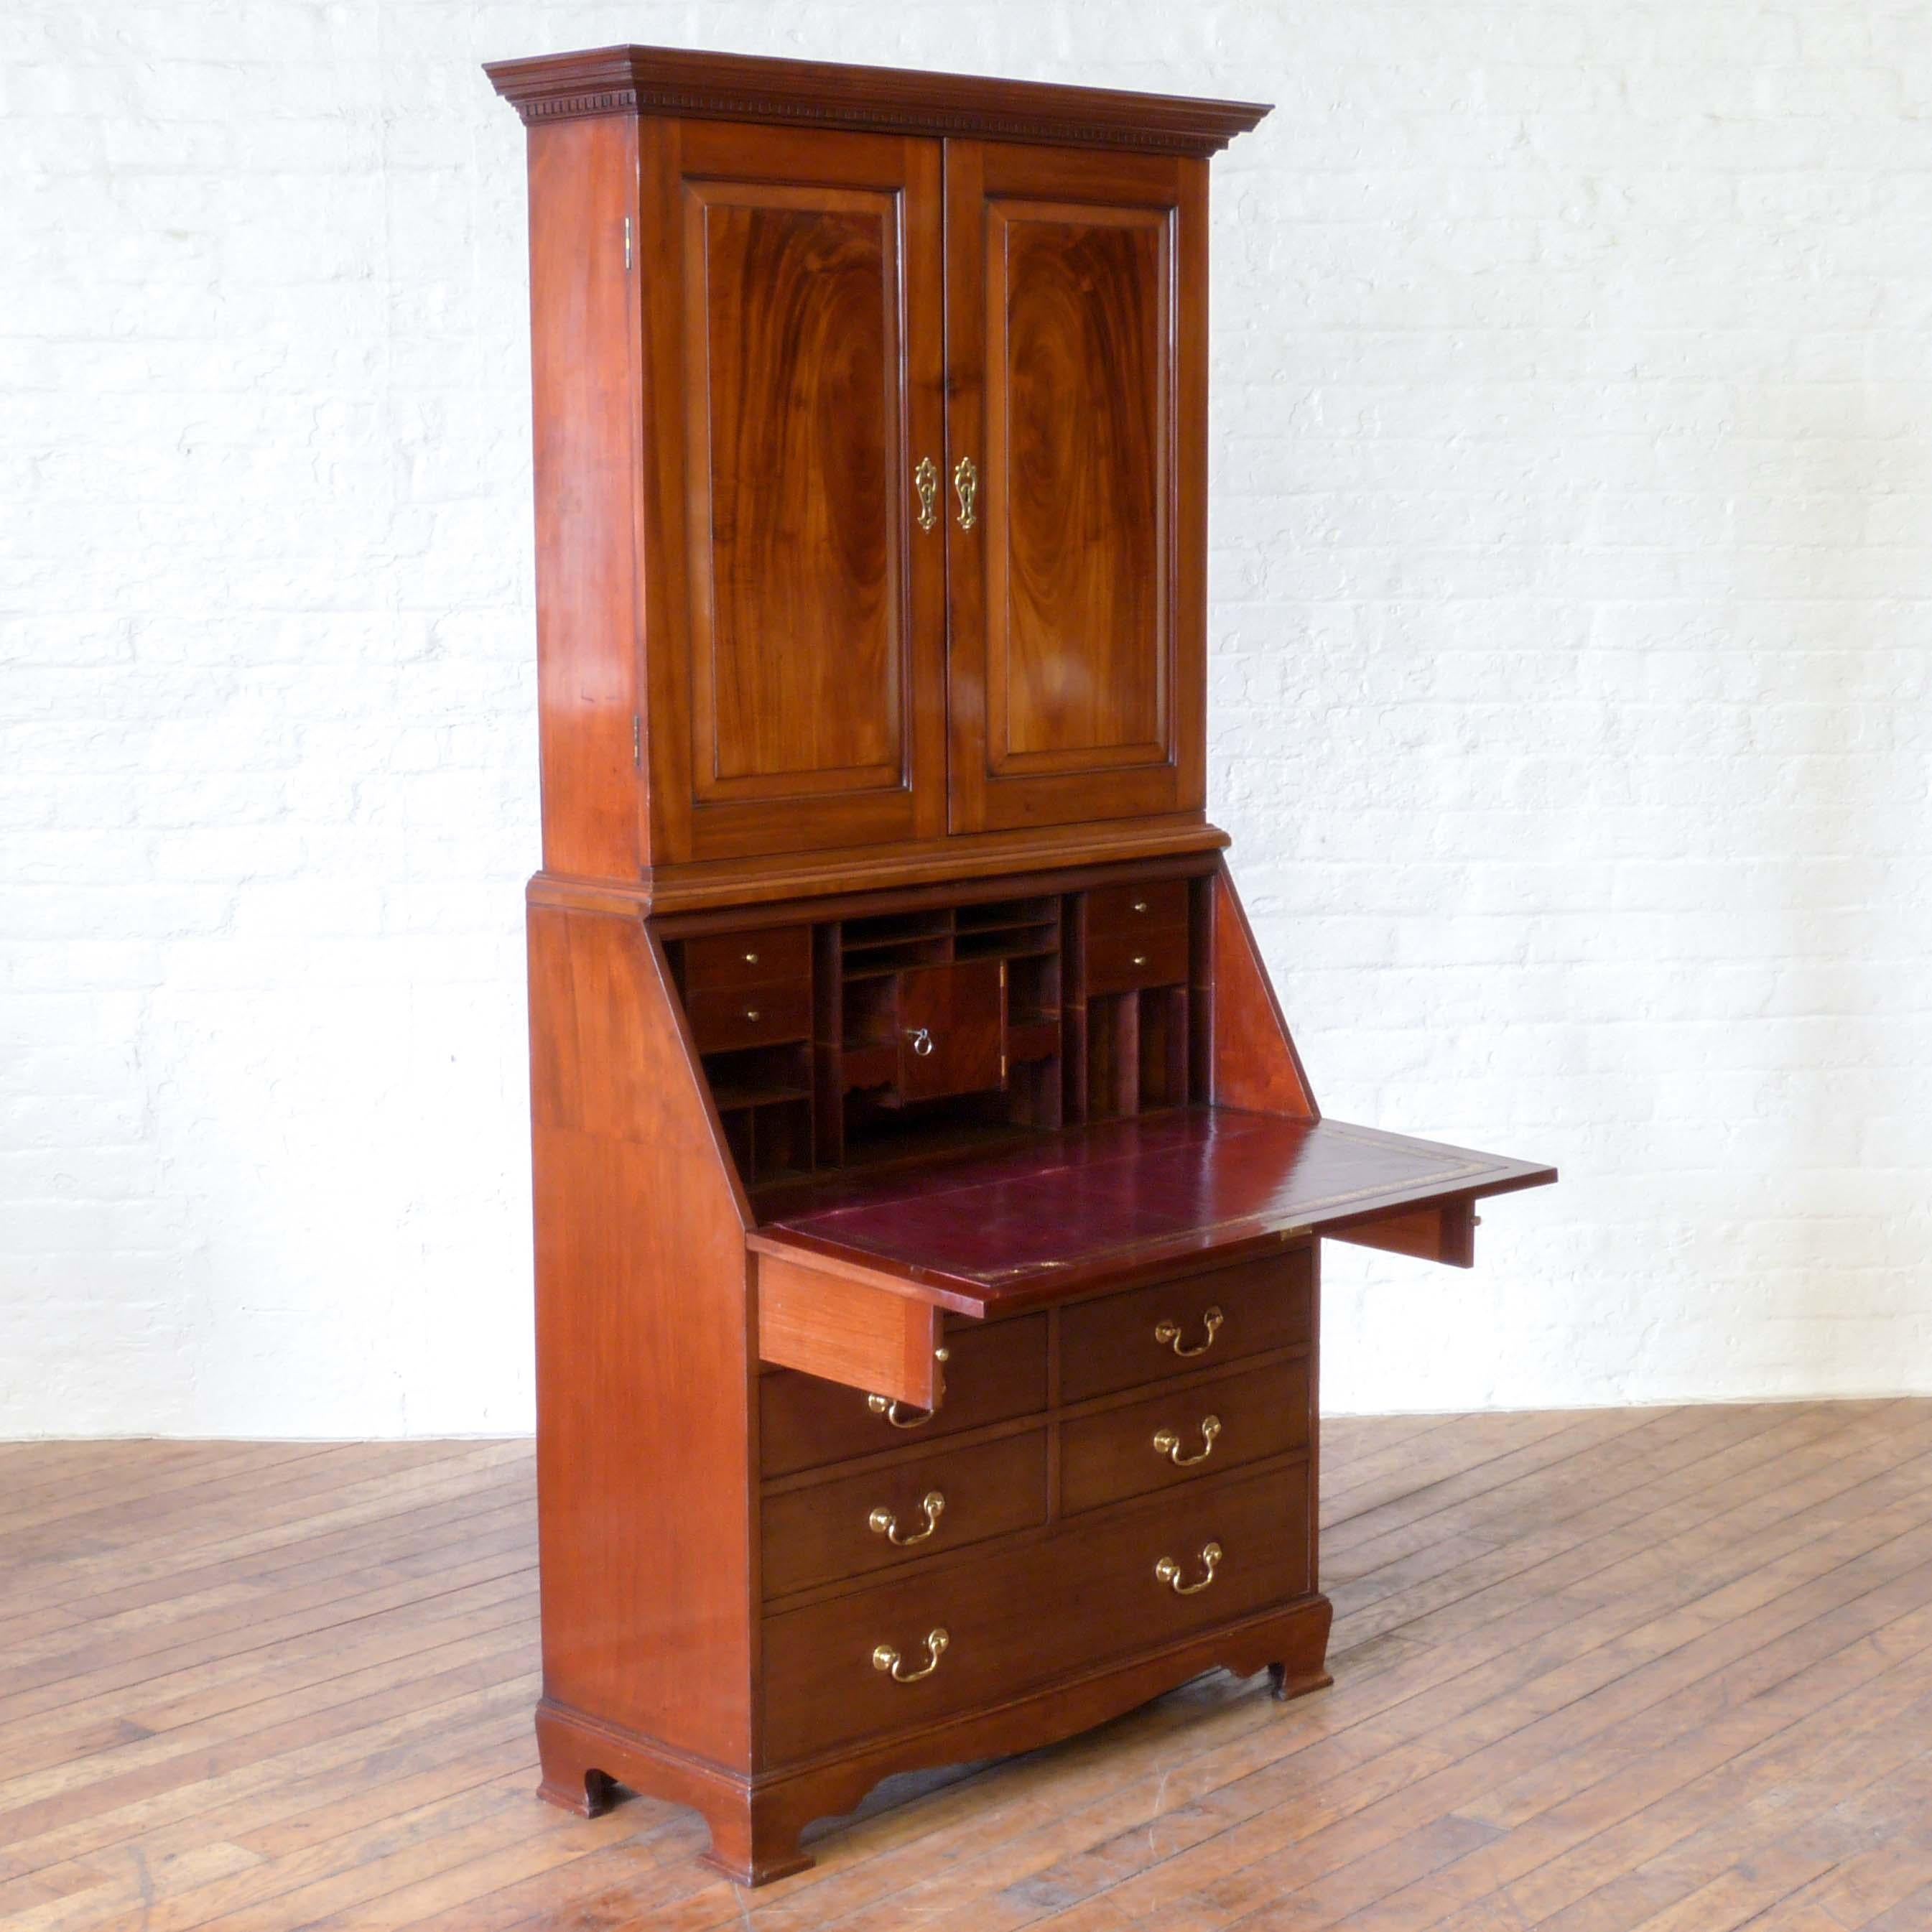 A stunning Victorian estate bureau bookcase of very shallow proportions. We feel that this piece was put together by a country estate cabinet maker in the late Victorian period. Using beautiful cuts of mahogany and oak linings from earlier